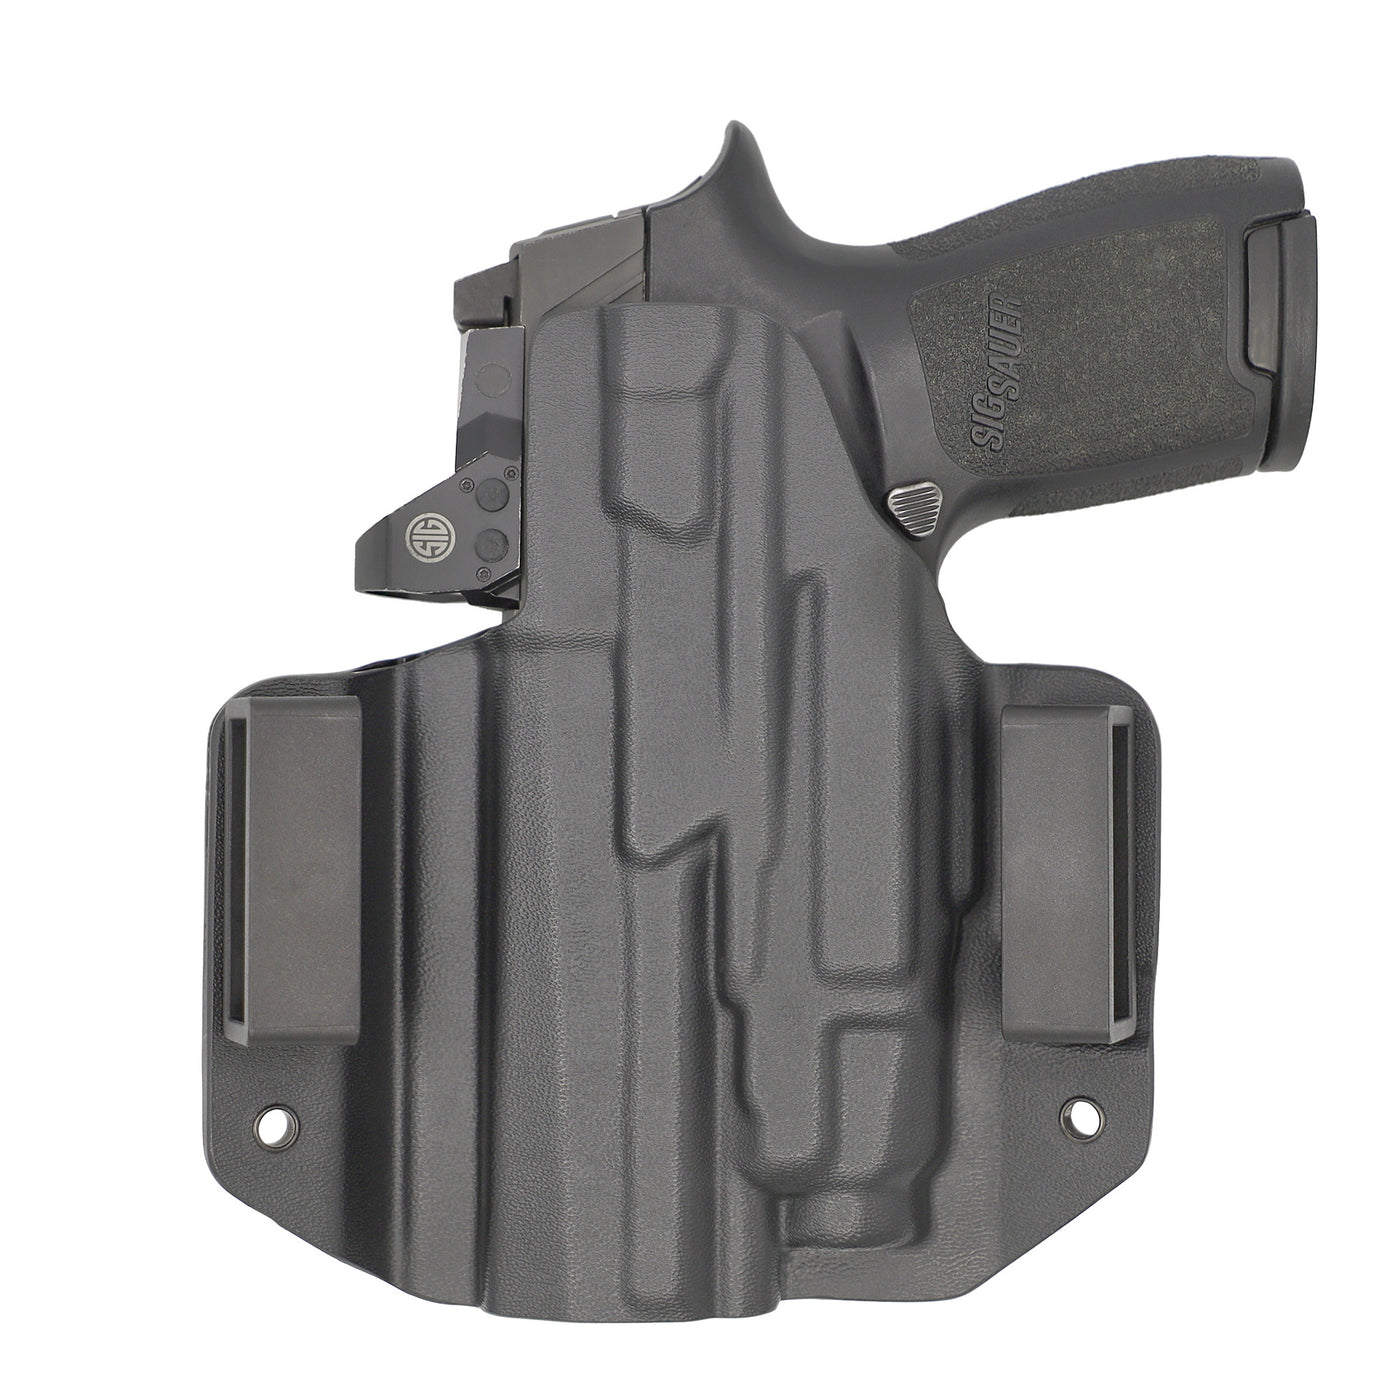 C&G Holsters quickship OWB Tactical XDM Elite streamlight TLR7/a in holstered position back view